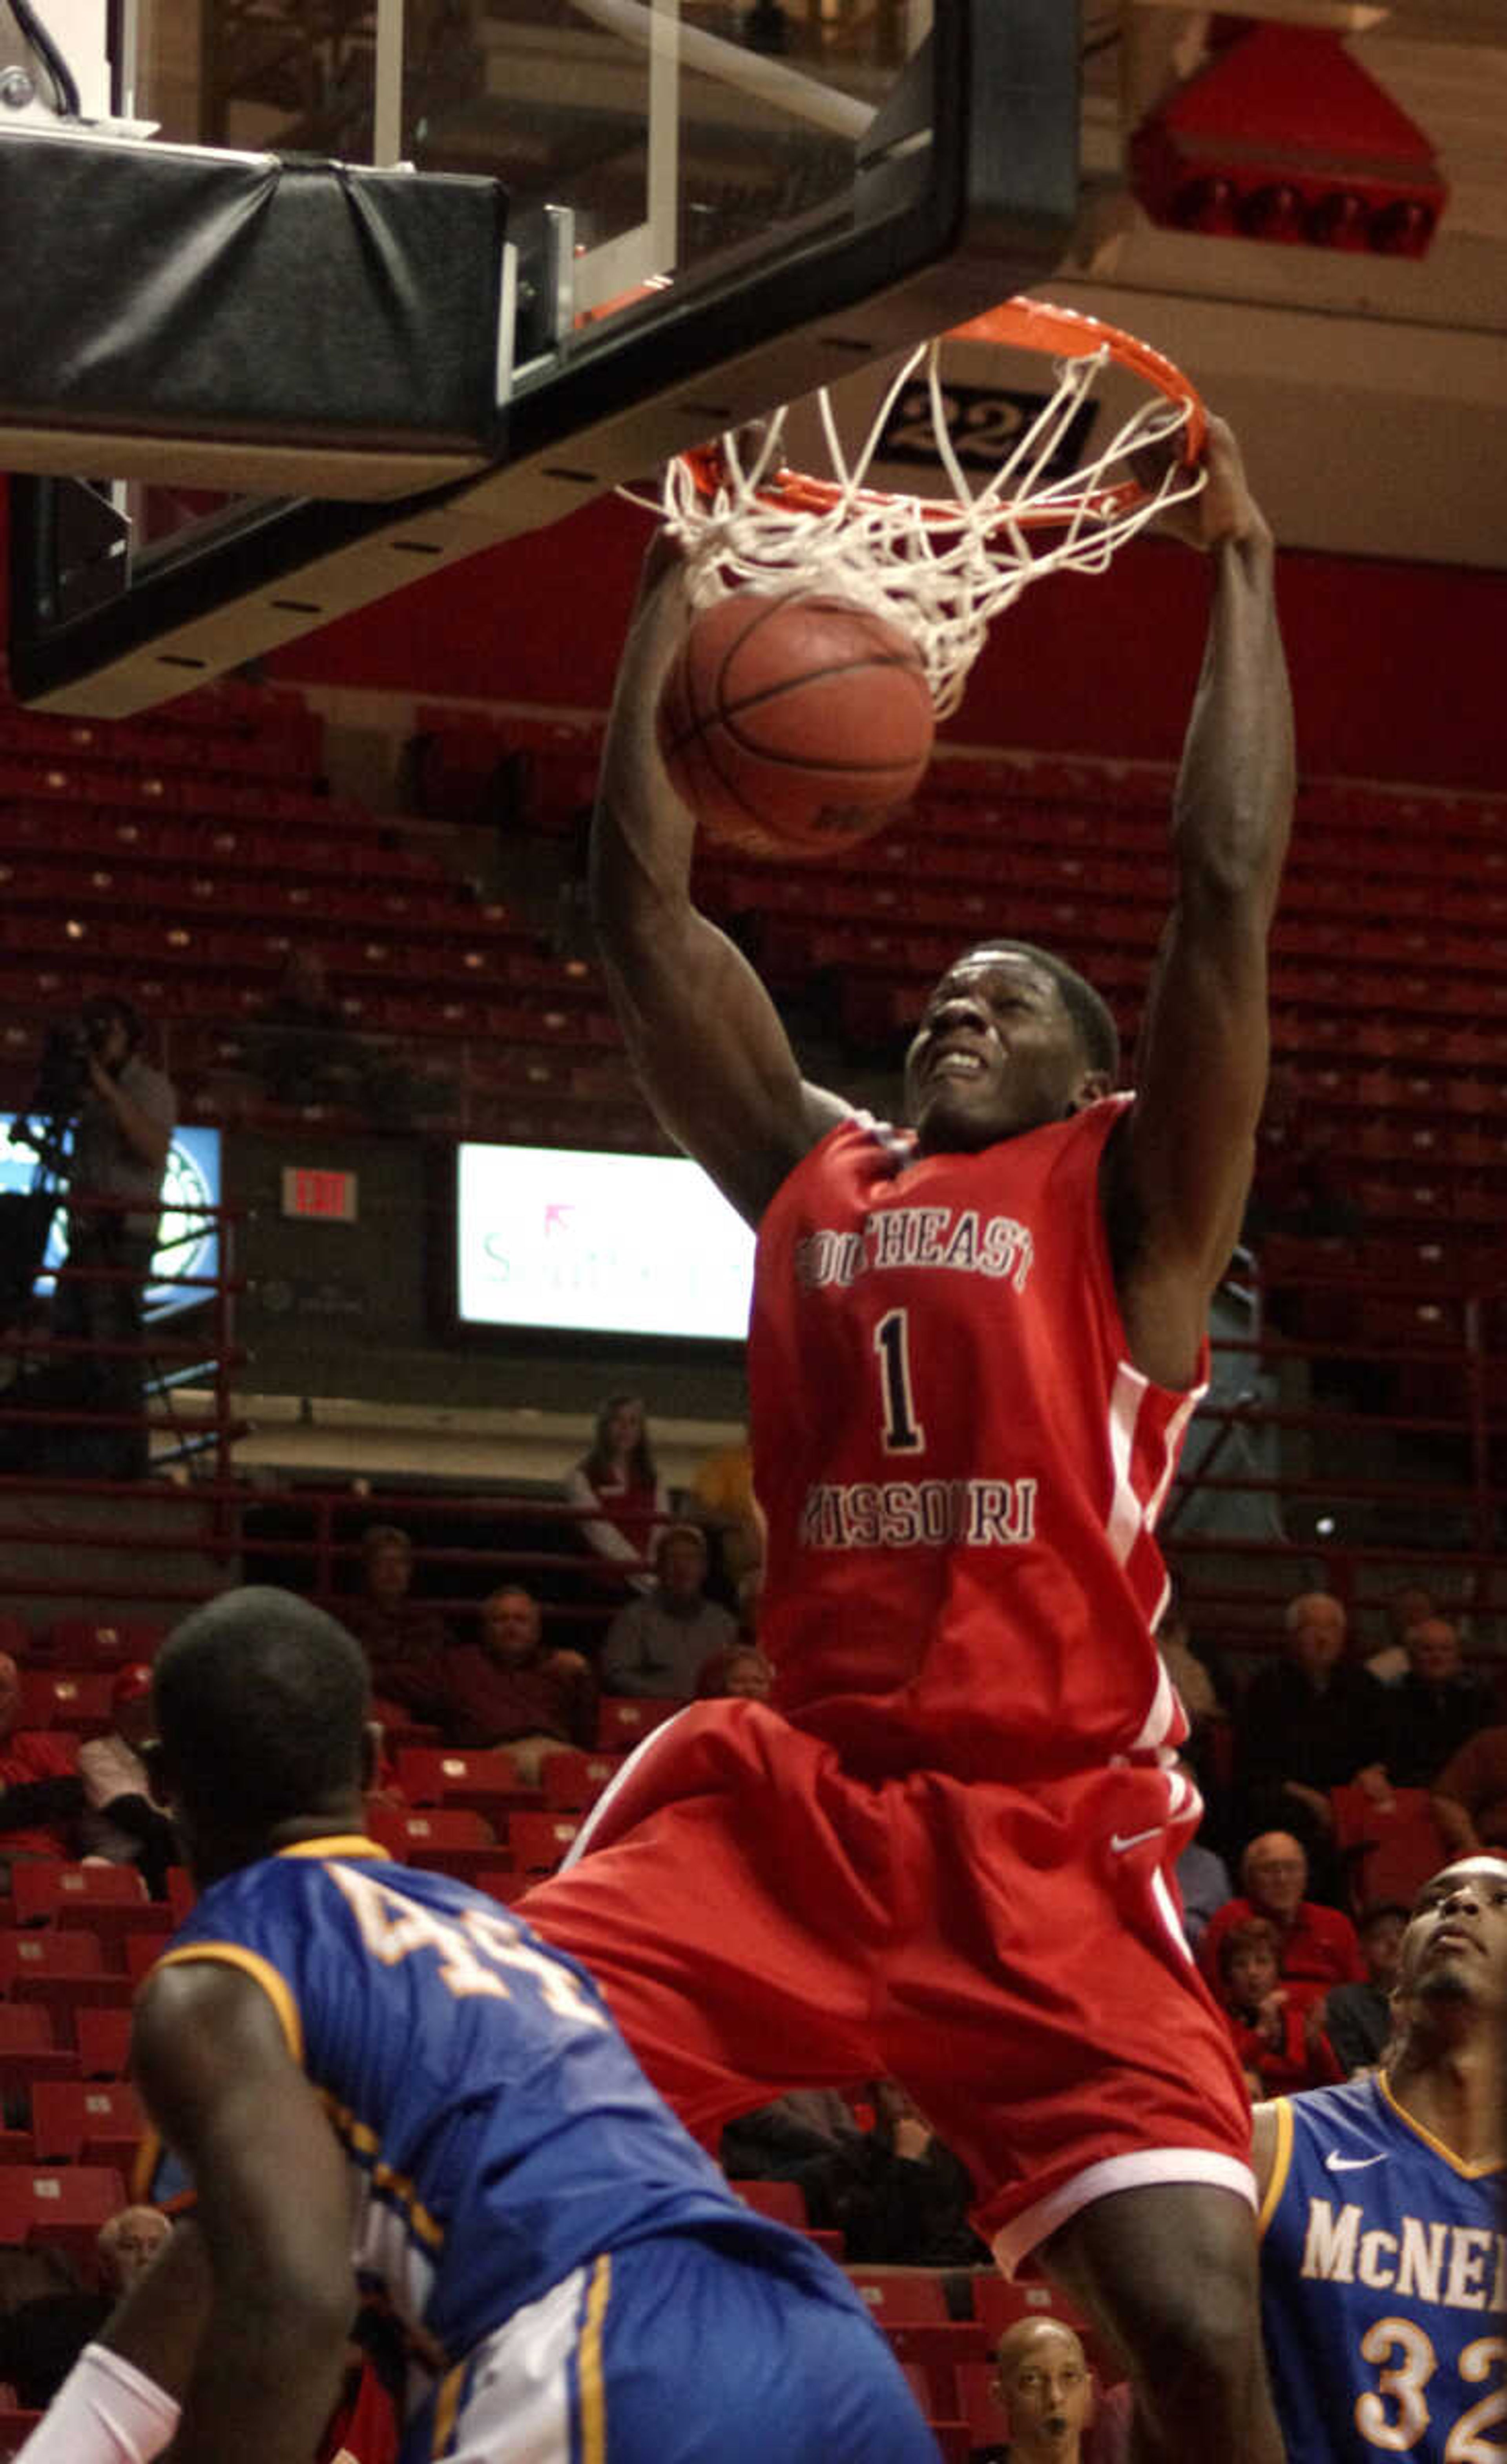 Nino Johnson's game-high 20 points lead Redhawks over McNeese State 64-53